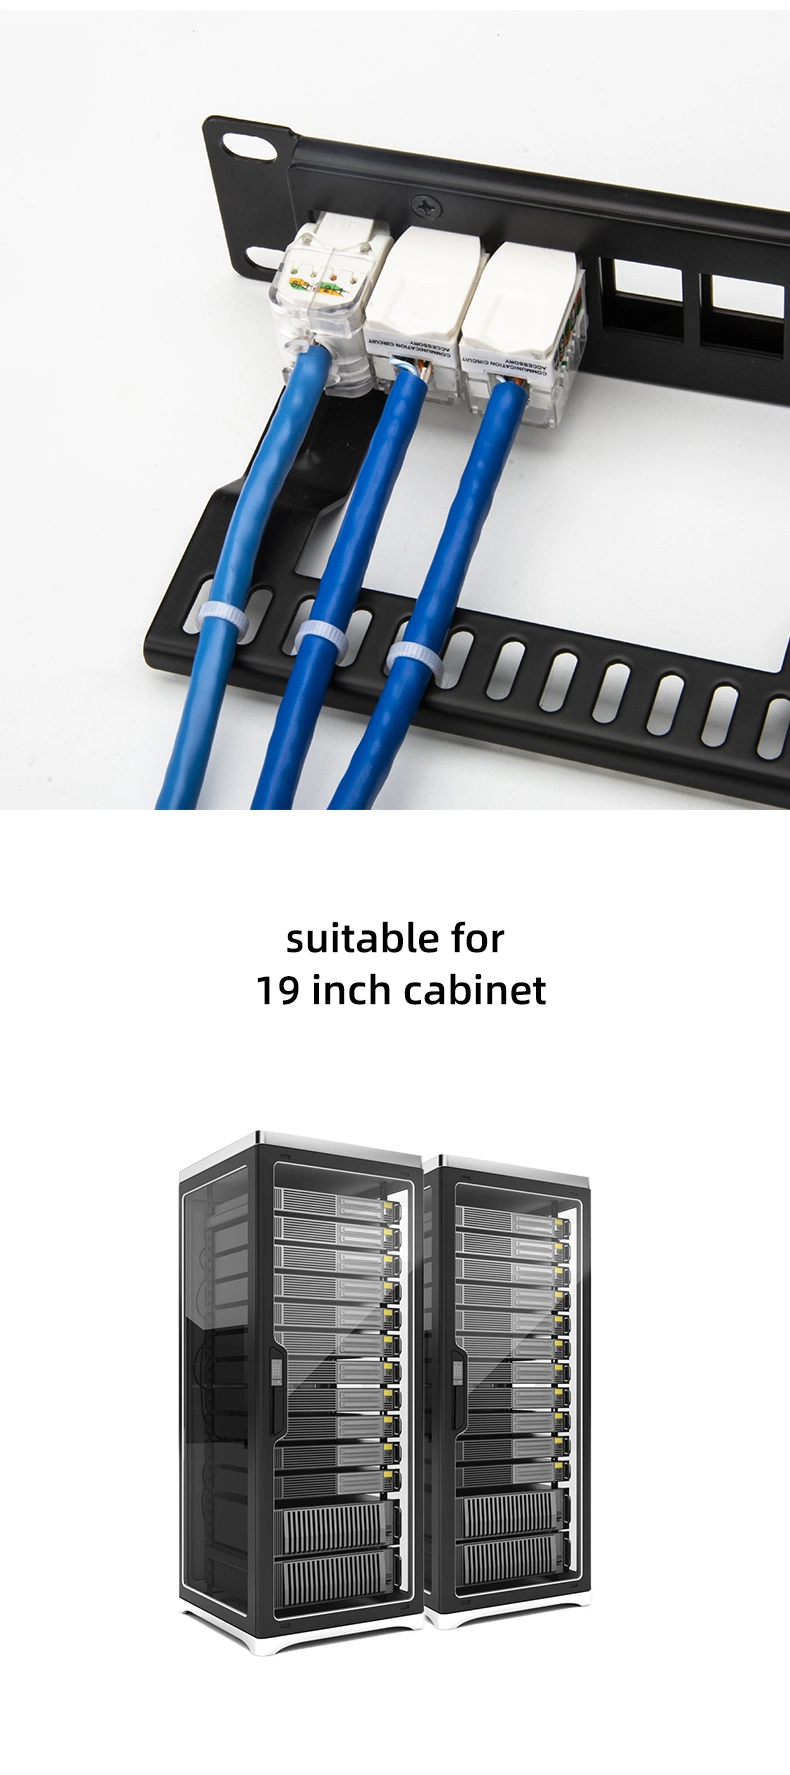 UTP Blank Patch Panel 24 Port up and Down for Keystone Jack